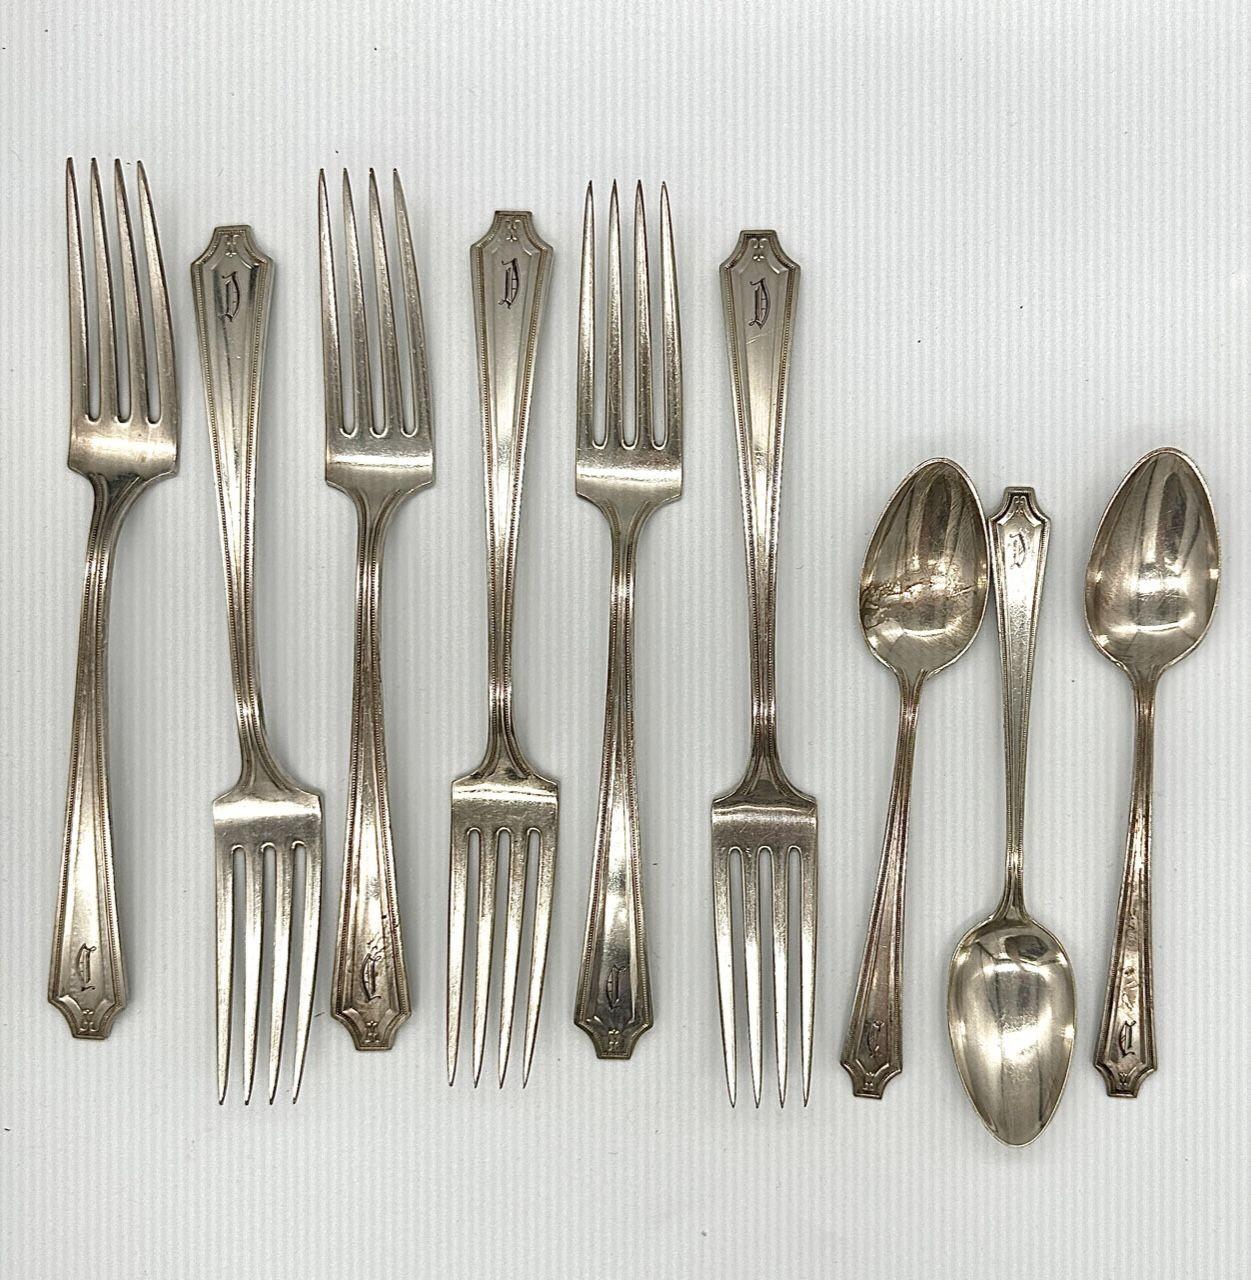 American Old French King Albert Sterling Silverware Set of 15 by Whiting Manf Co